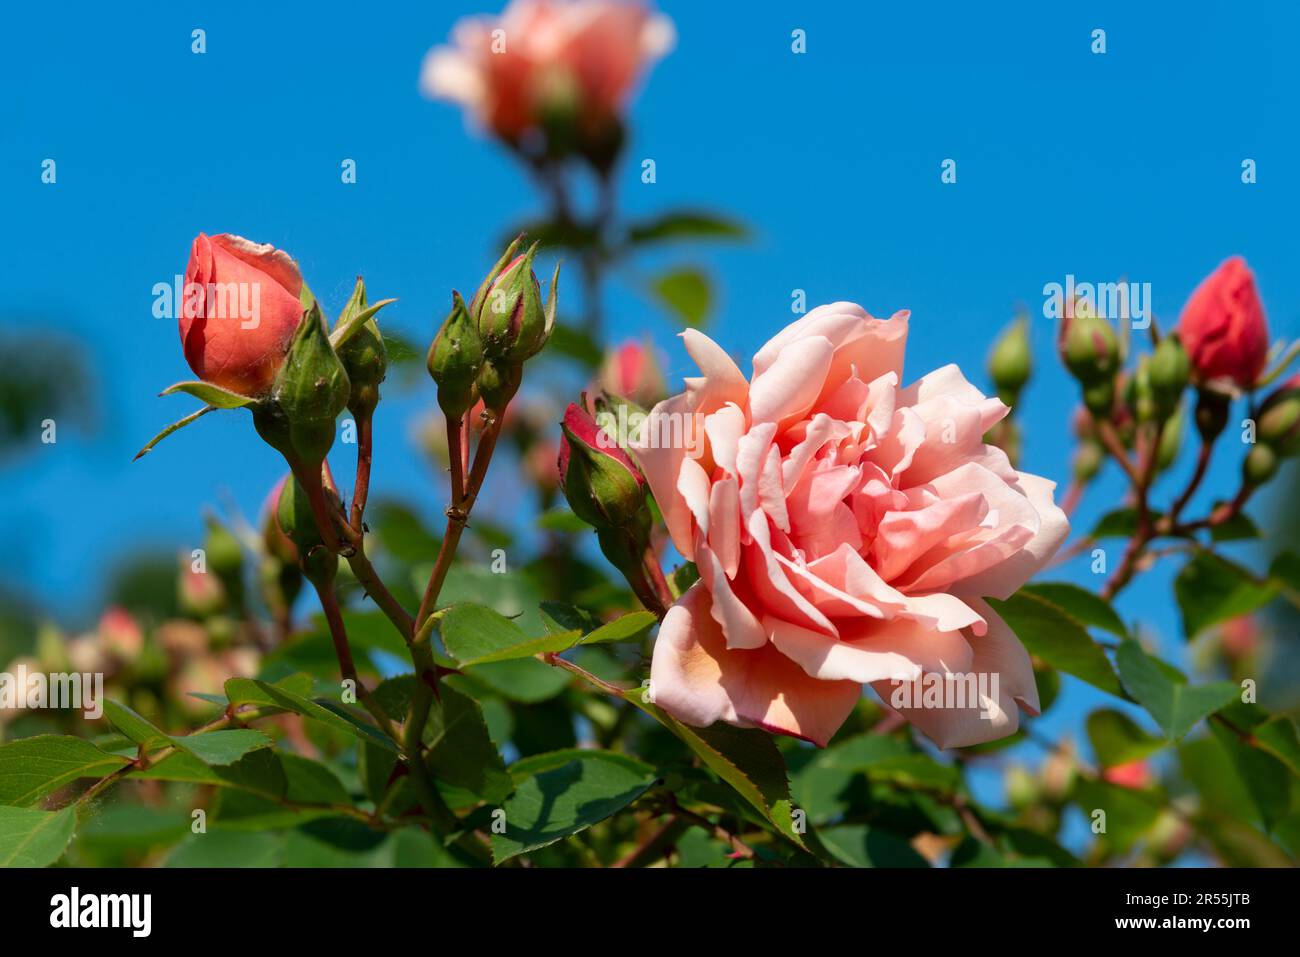 Flowers of a Pink Roses Background Sky Stock Photo